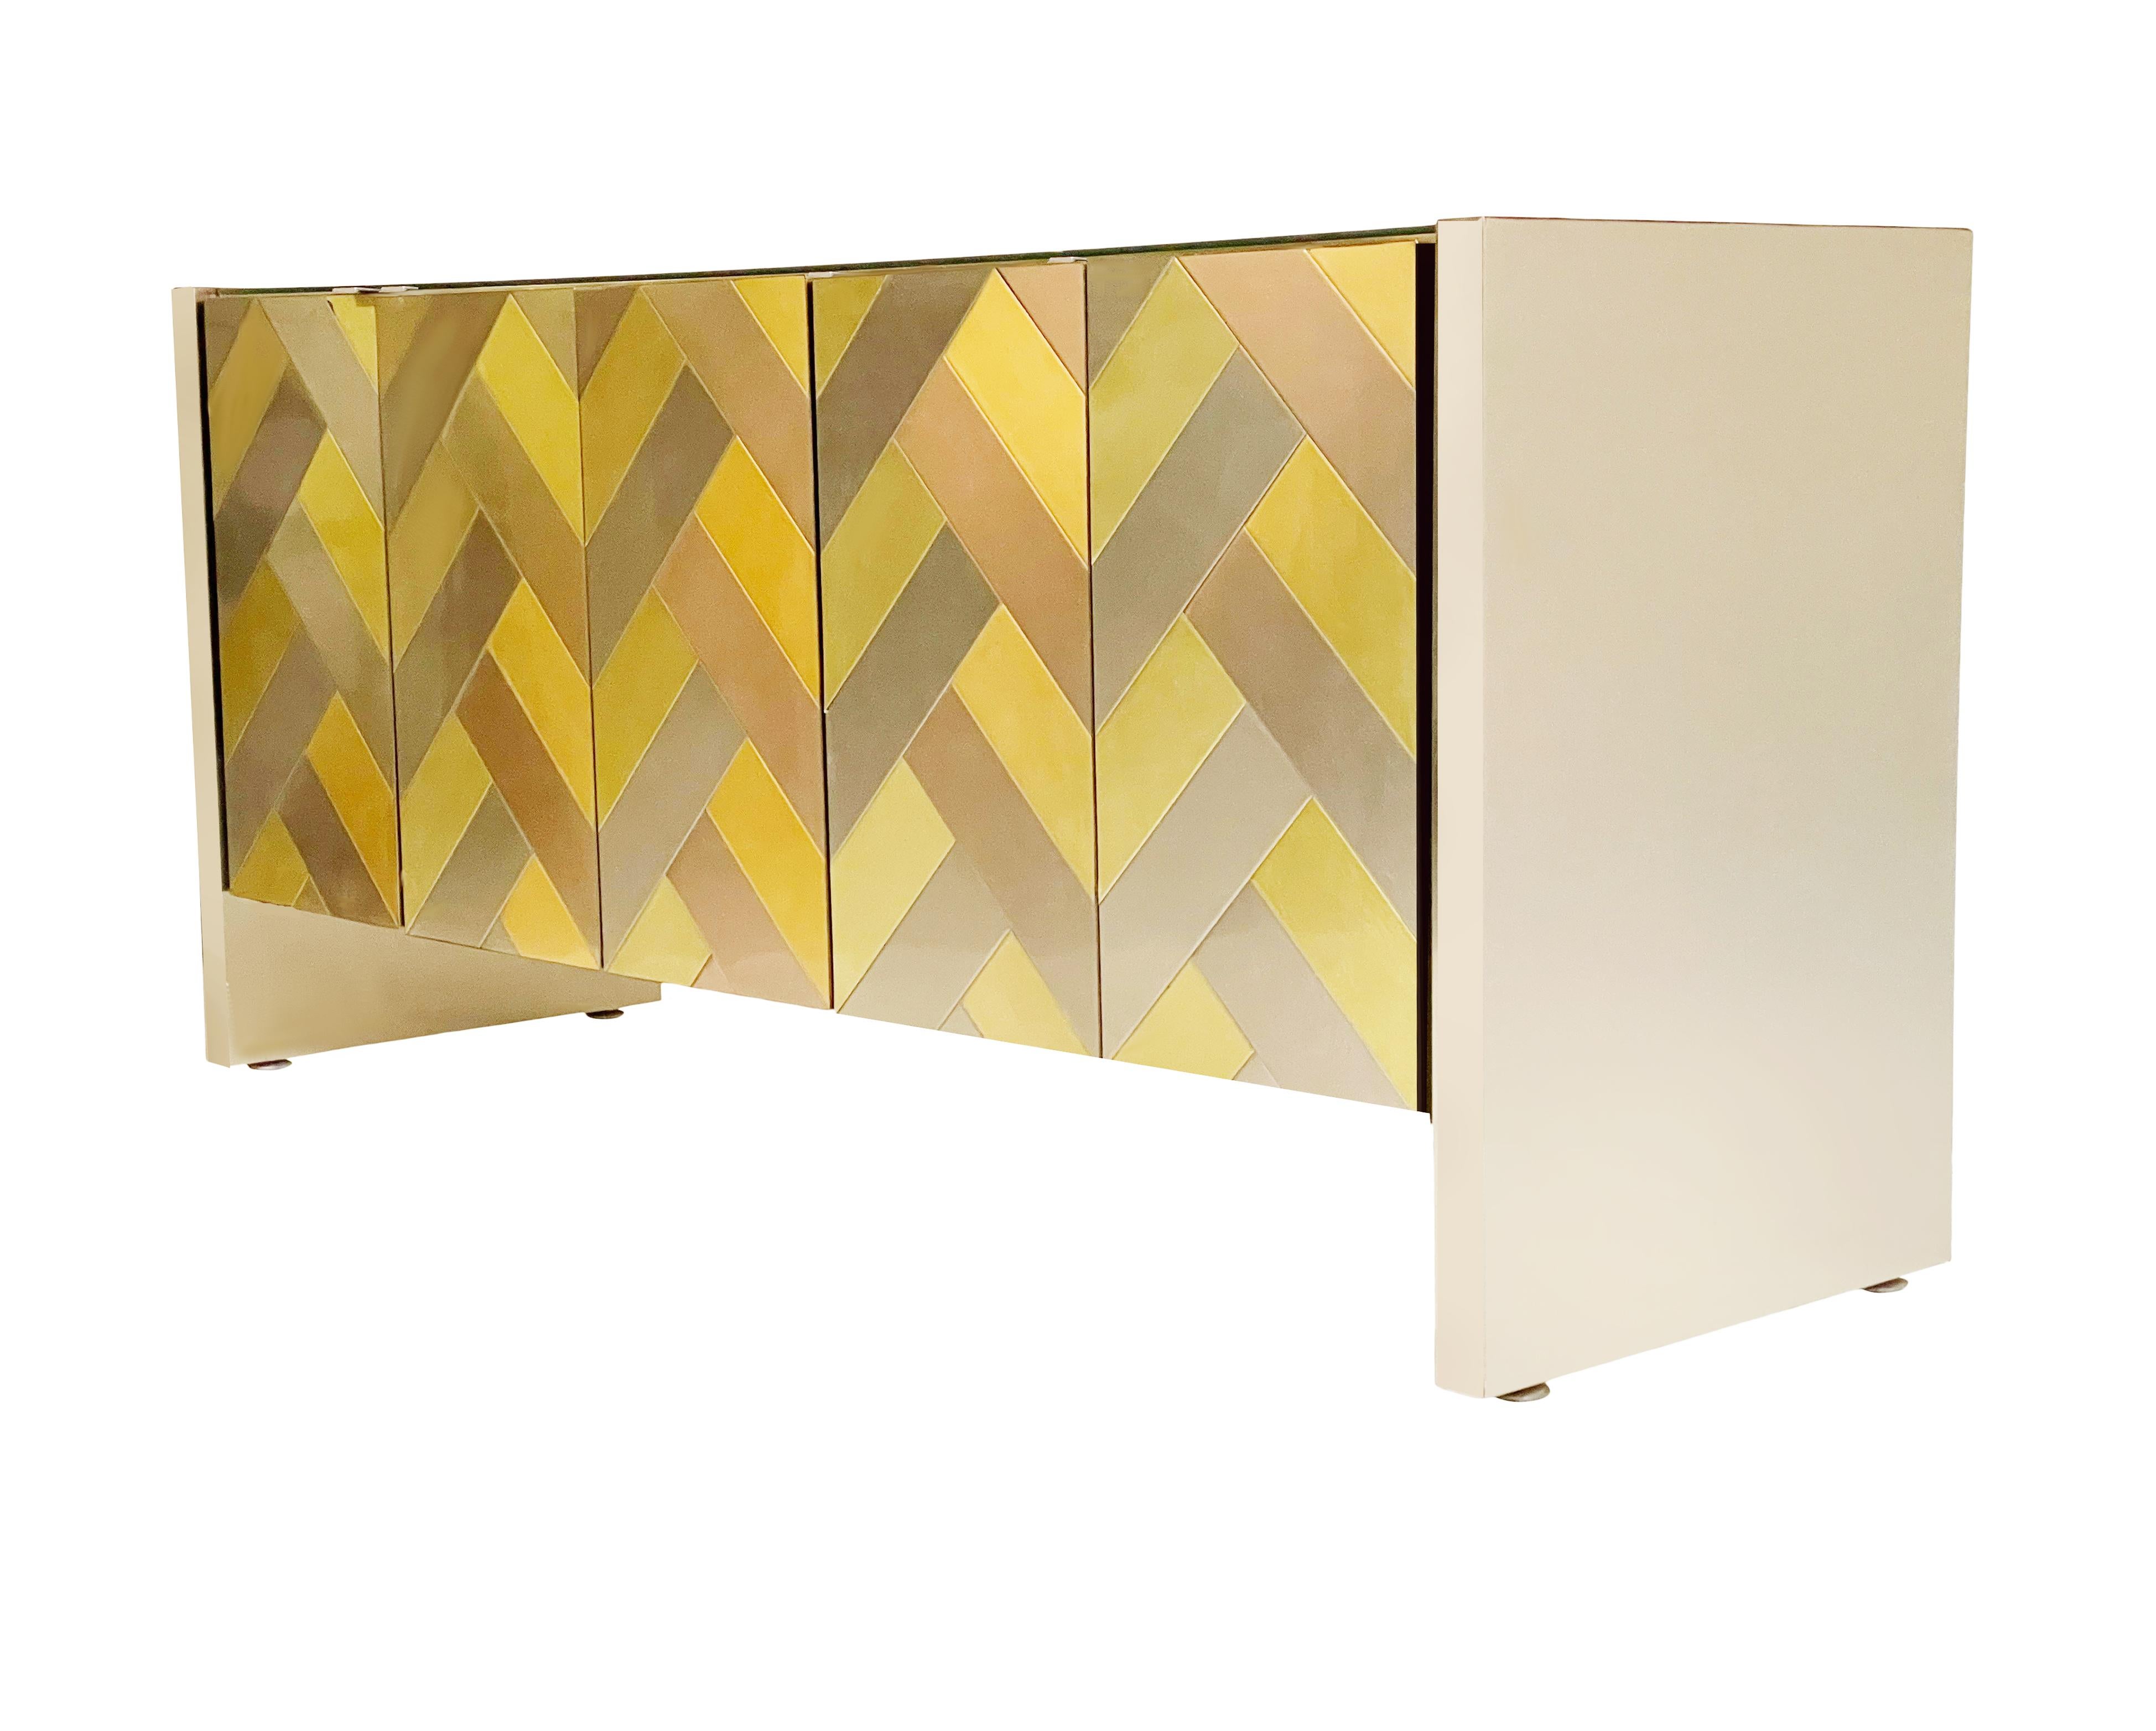 Mid-Century Modern Brass & Brushed Steel Herringbone Credenza or Cabinet by Ello In Good Condition For Sale In Philadelphia, PA